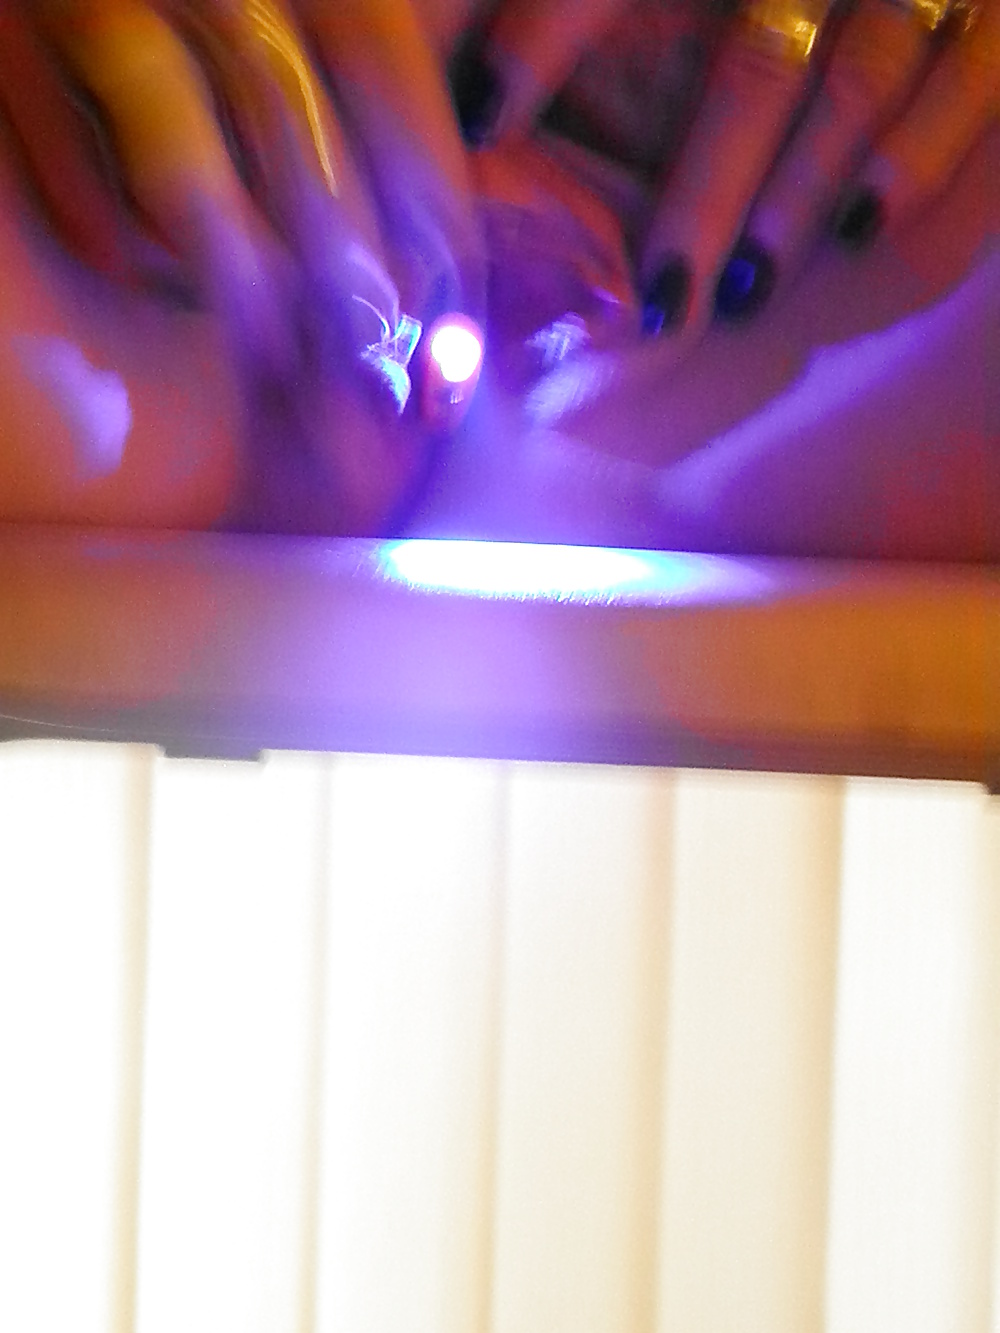 Aine ,,YES that is a blue light in my pussy lol #31714730